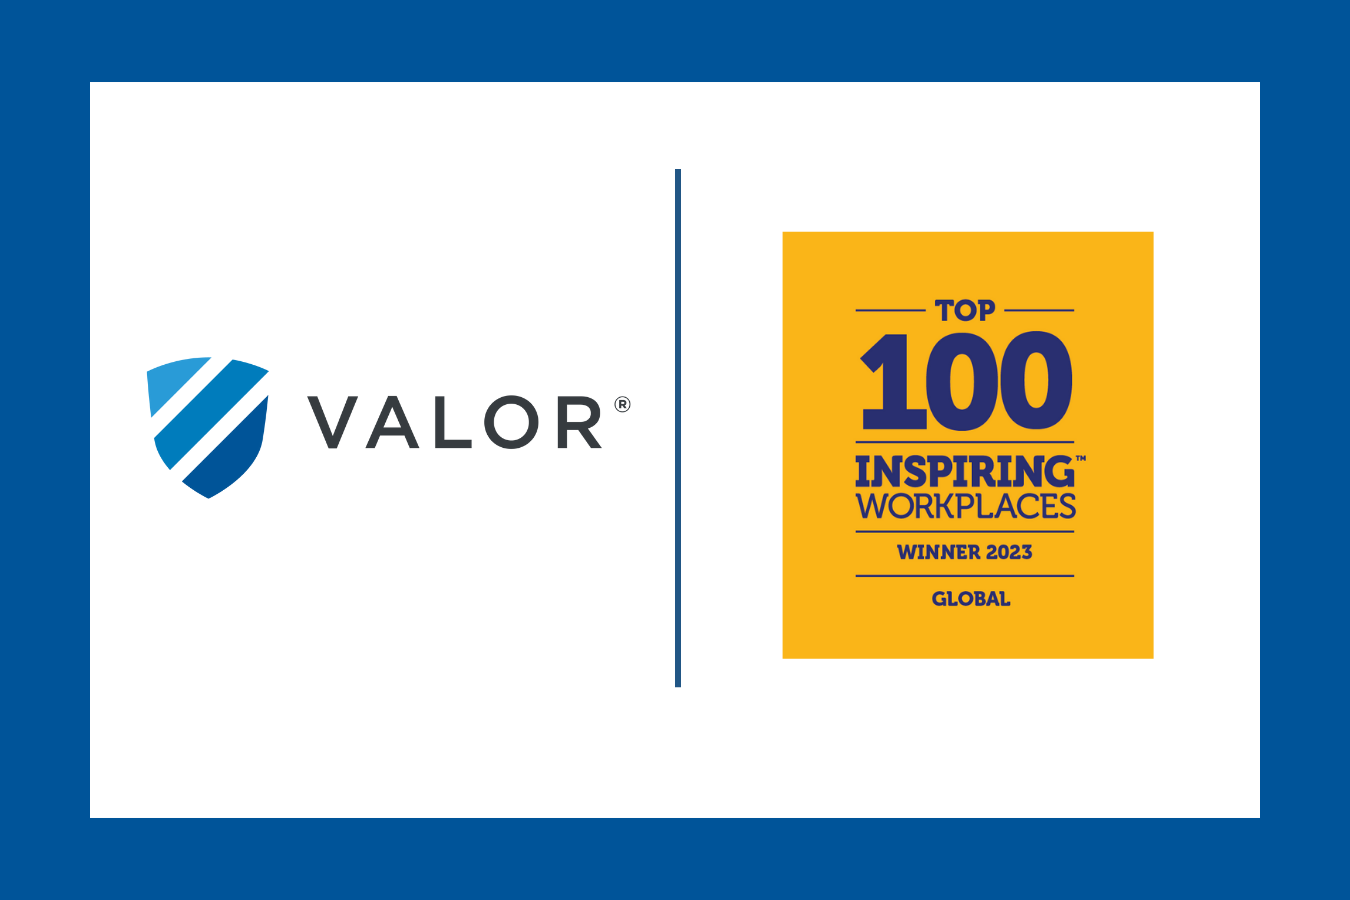 Valor Named to Inaugural Global Top 100 Inspiring Workplaces™ List